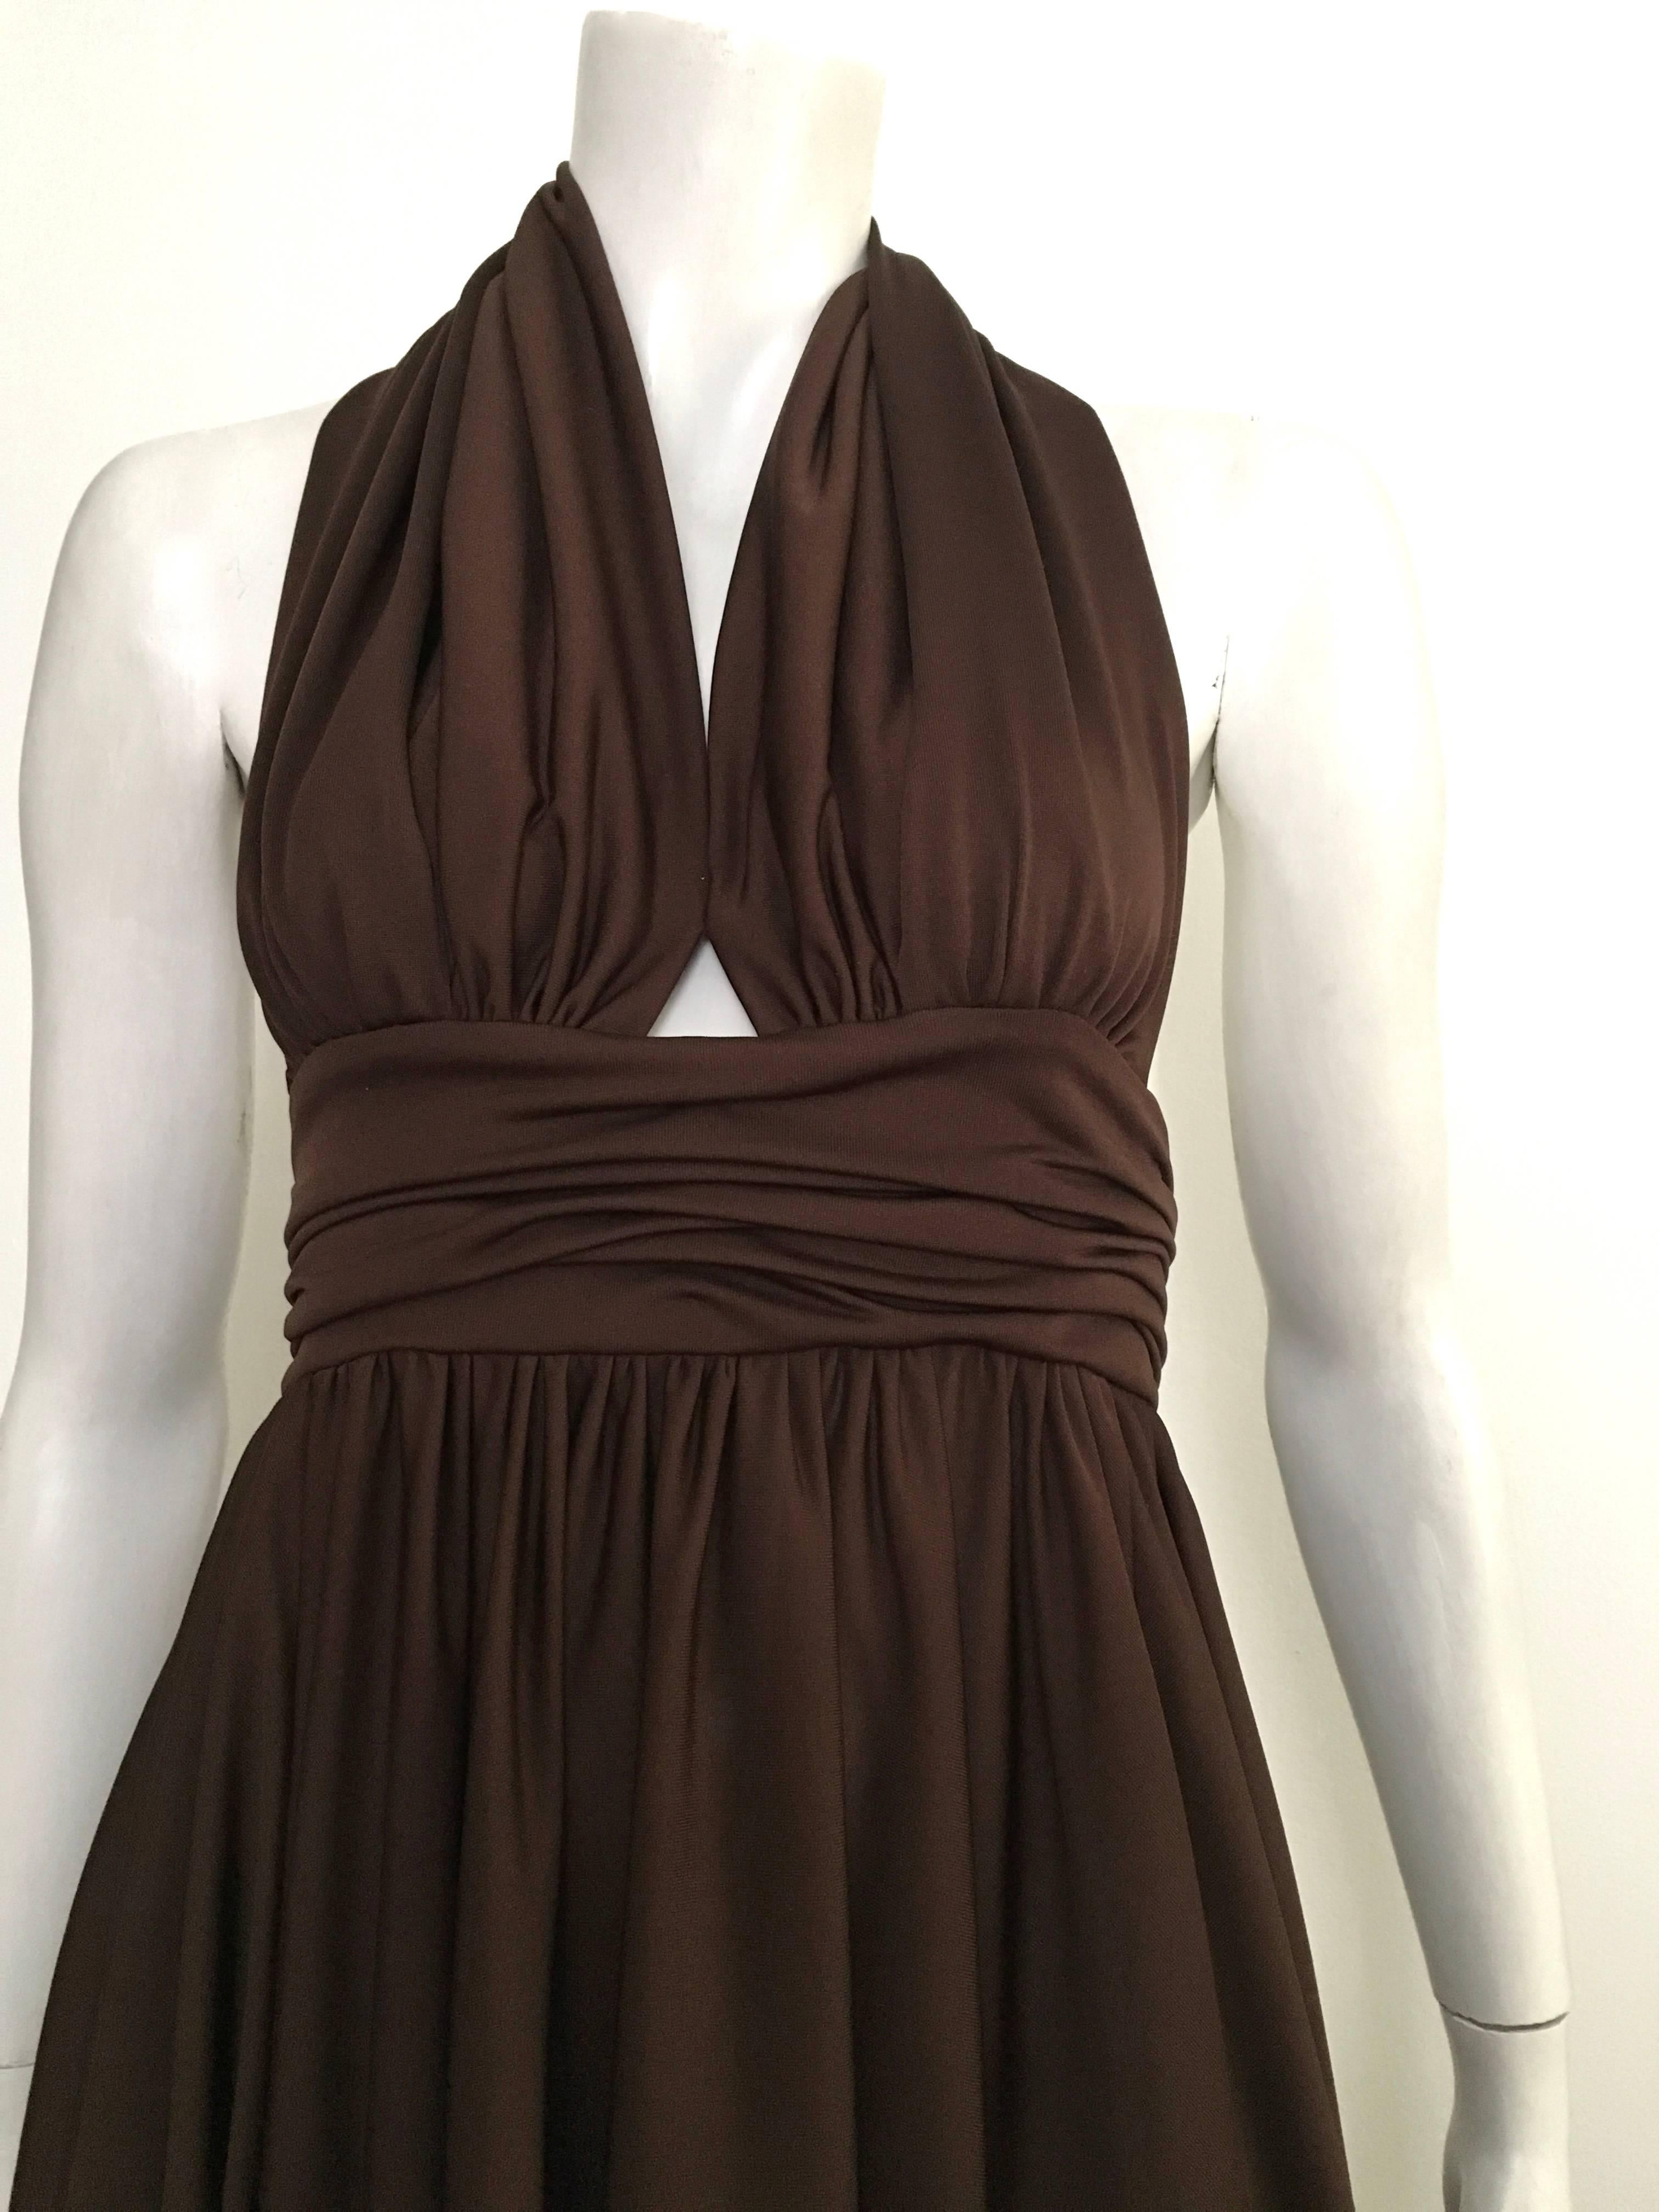 Frank Usher 1980s brown halter gown is a size 36 and fits like a USA size 4. Ladies if your body is the exact same as this size 4 mannequin this will fit to perfection. This is a red carpet gown worthy enough for Jessica Lange.  Gorgeous & elegant